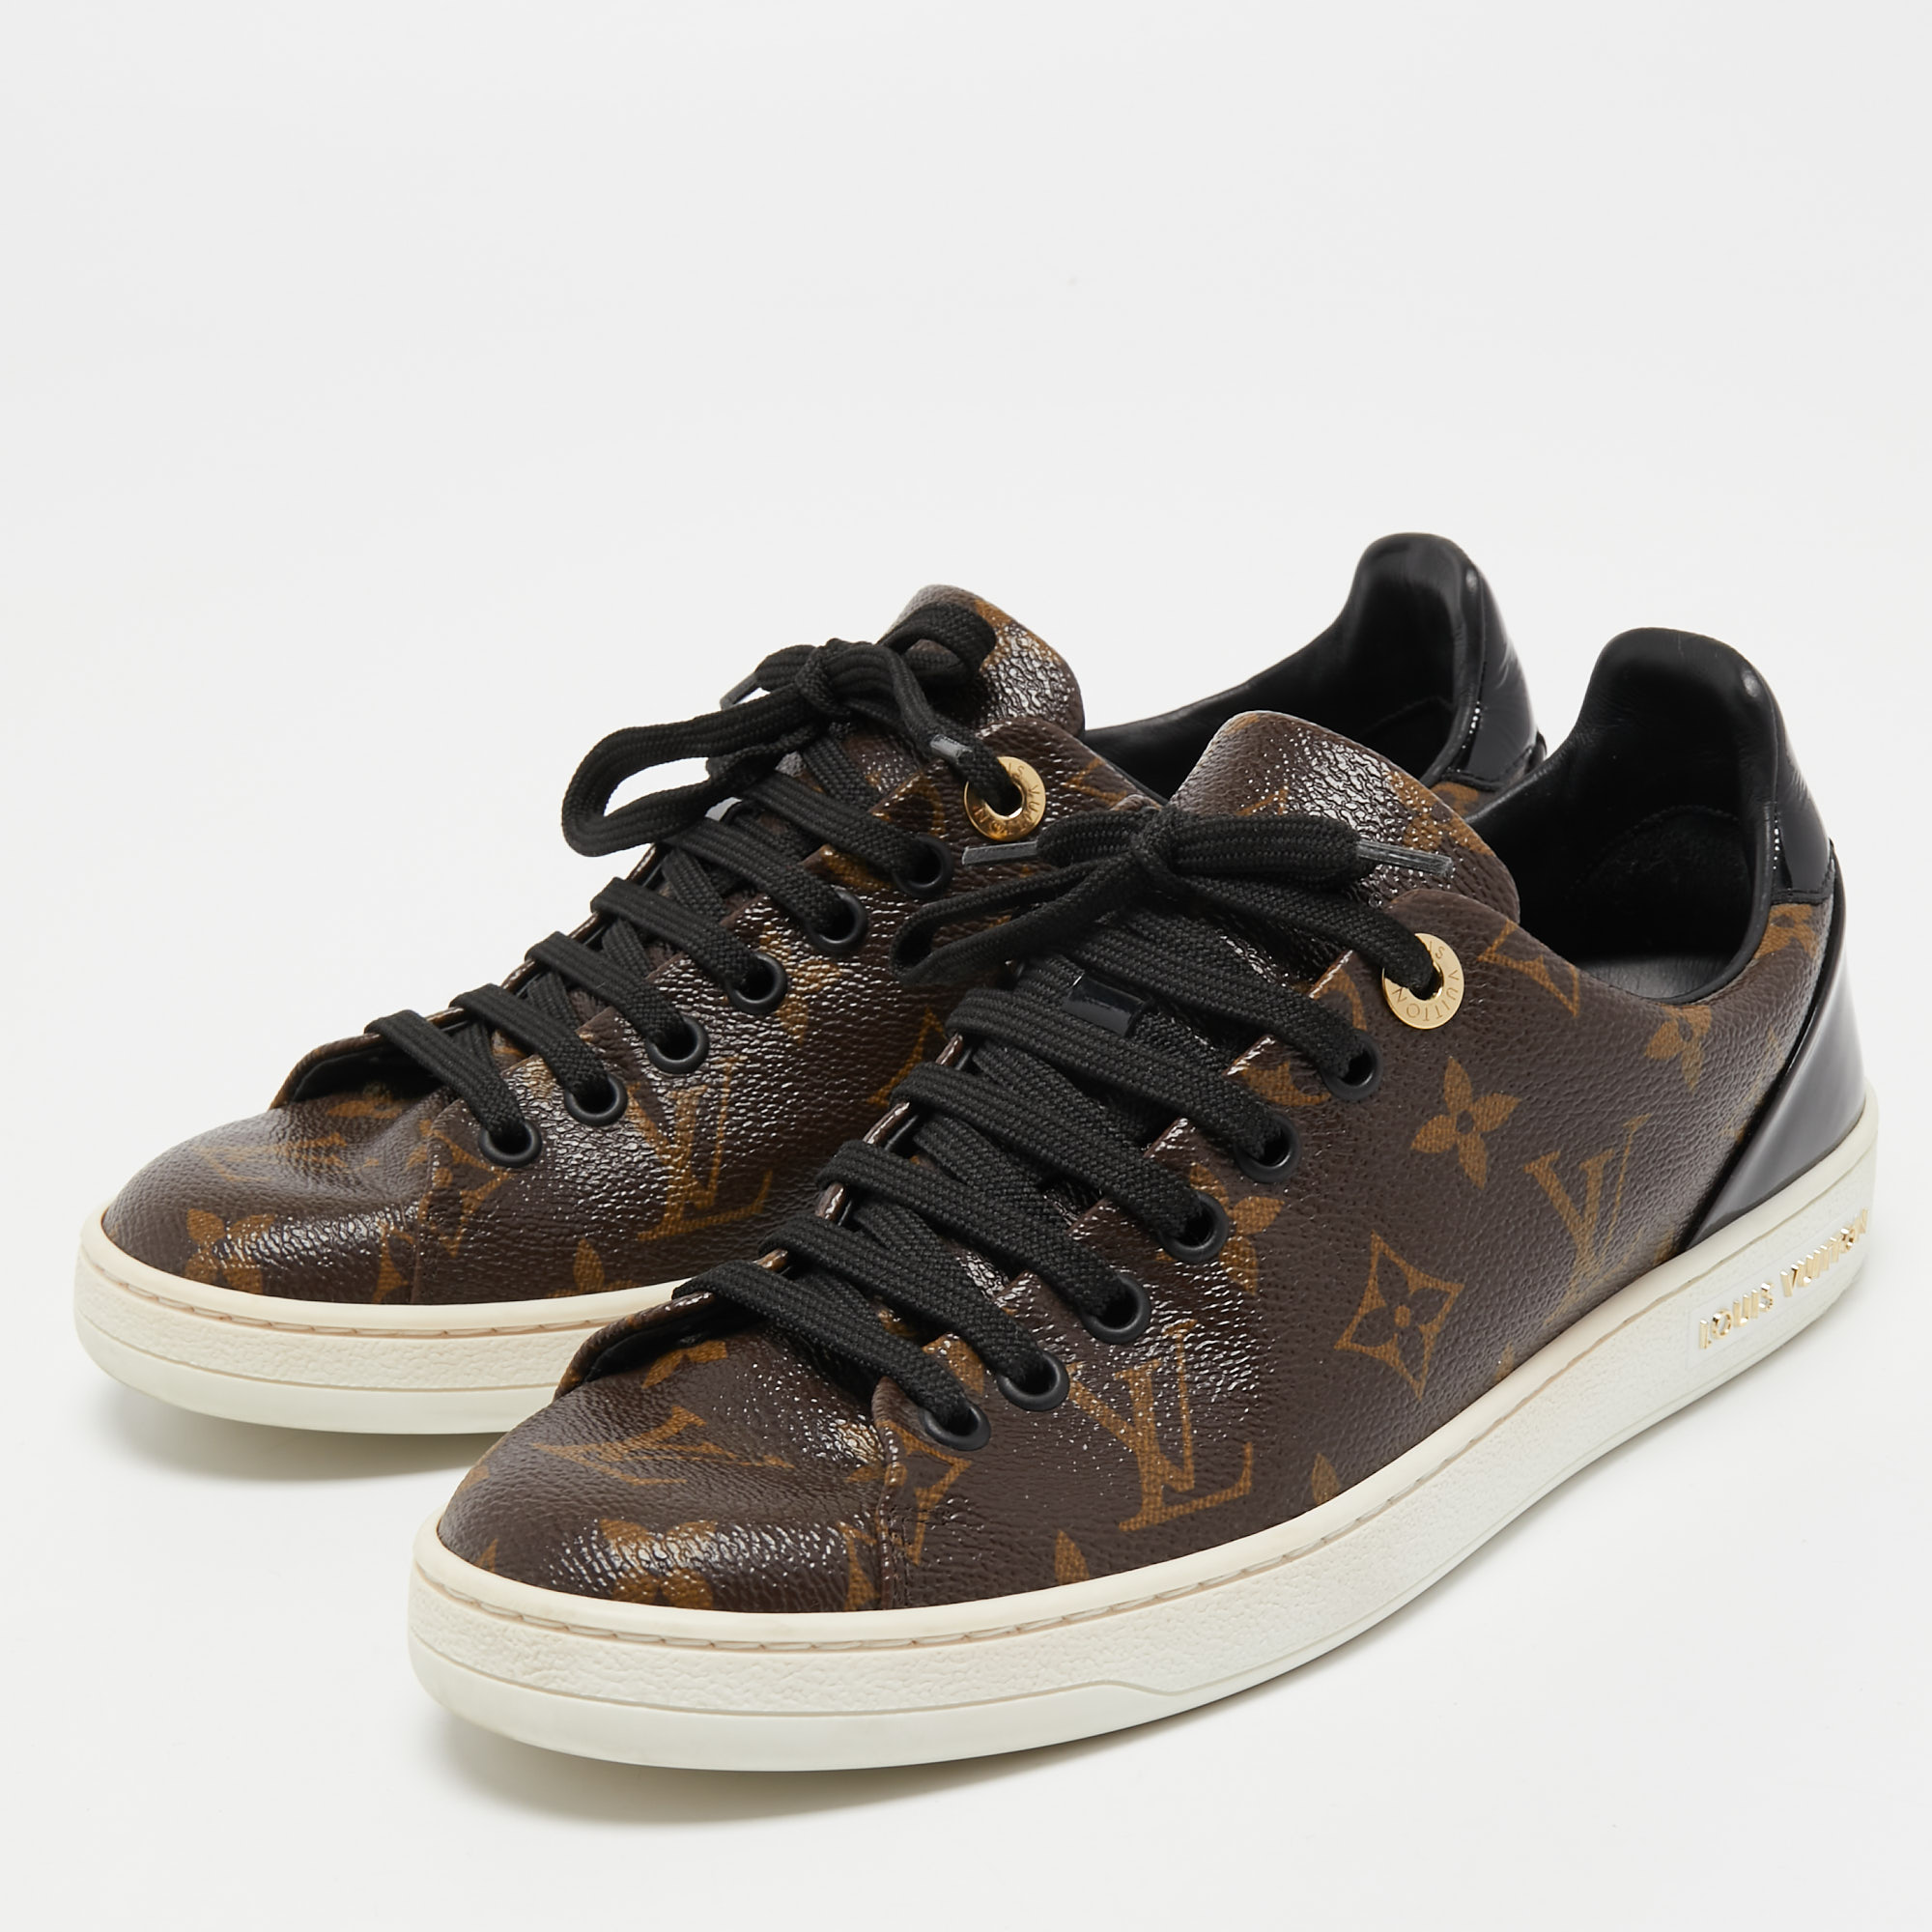 

Louis Vuitton Brown/Black Monogram Canvas and Patent Leather Frontrow Low Top Sneakers Size